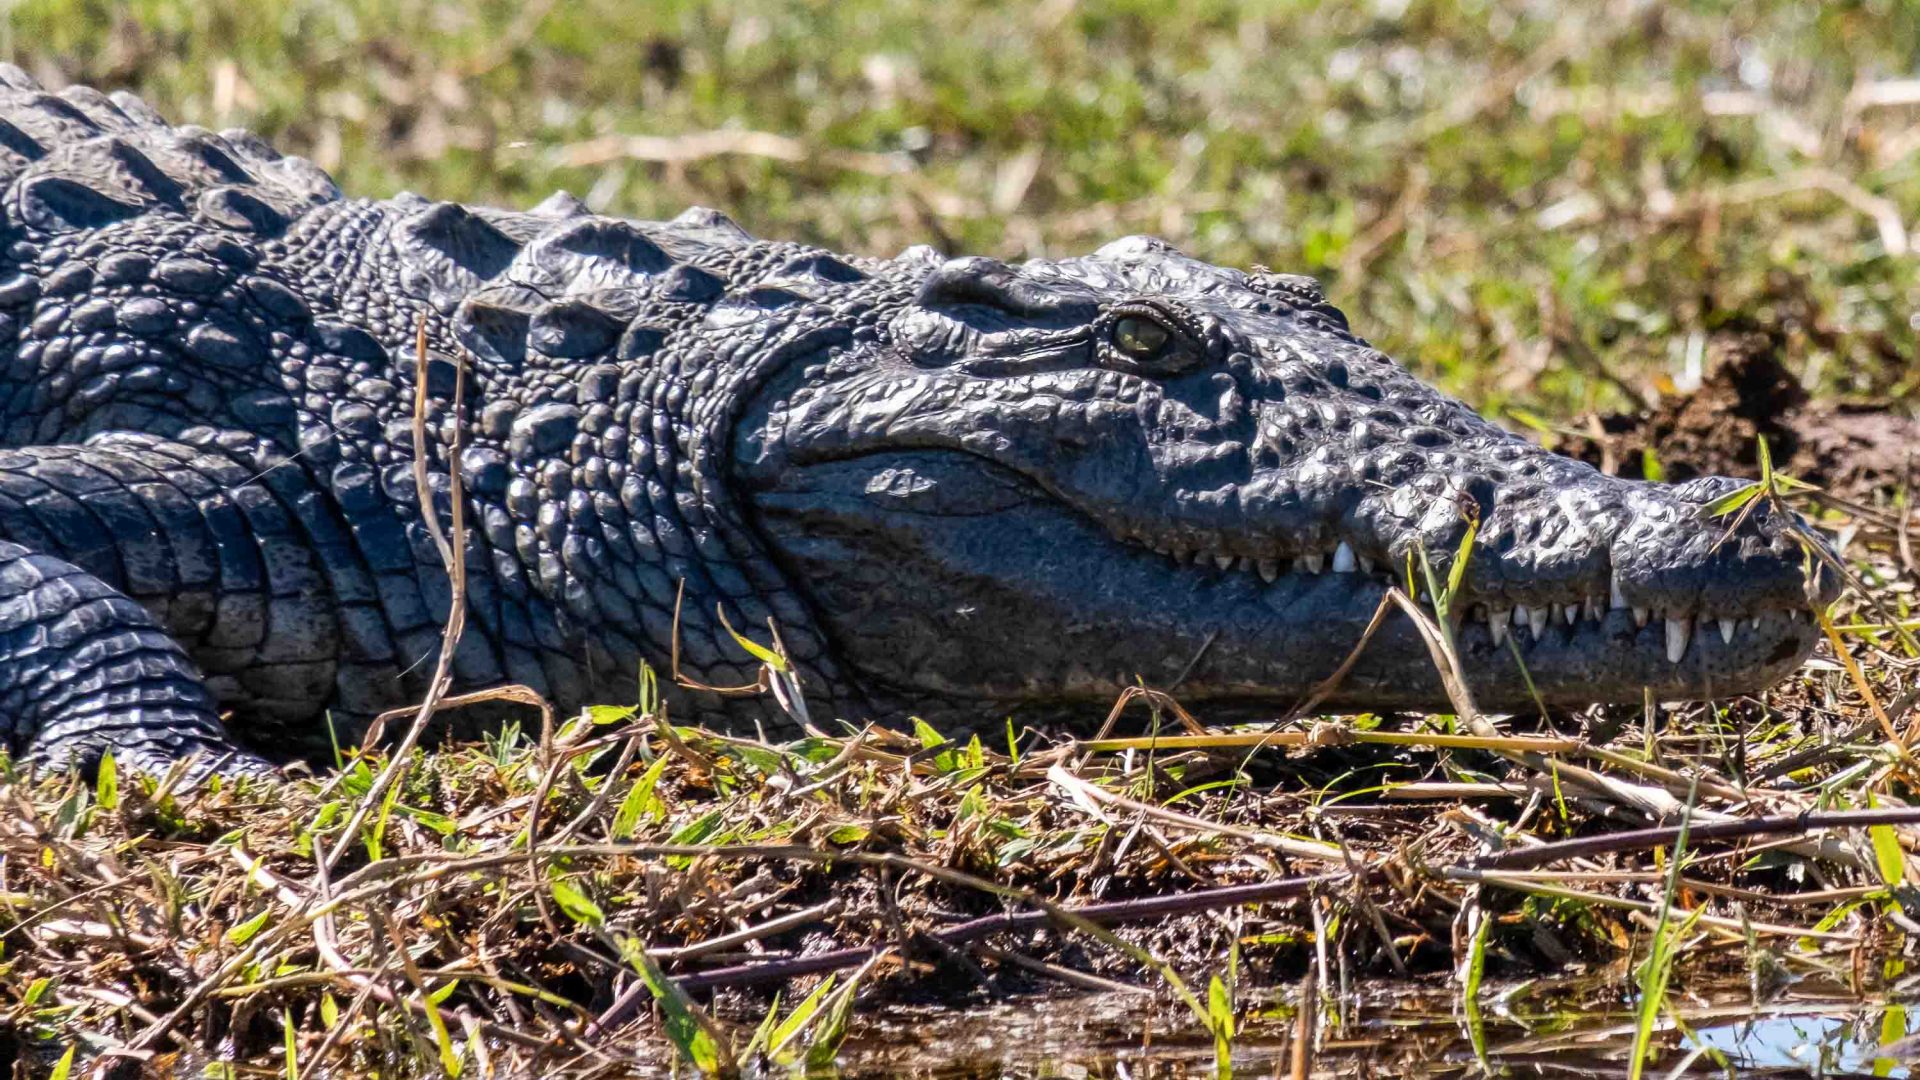 A crocodile rests on the ground.